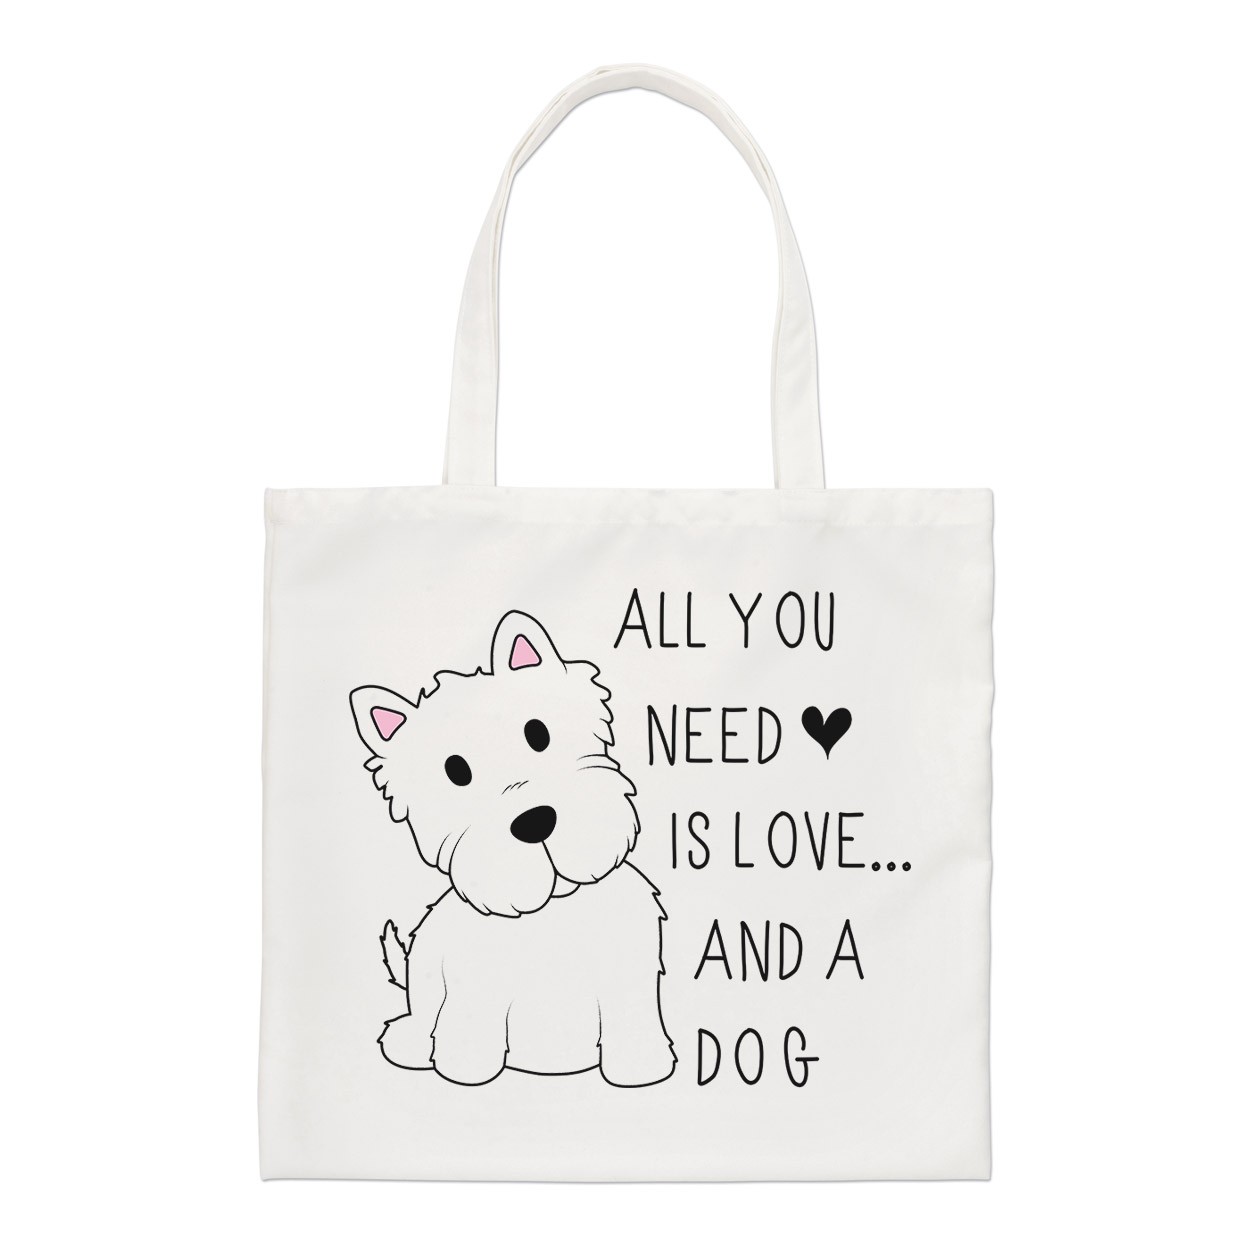 All You Need Is Love And A Dog Regular Tote Bag